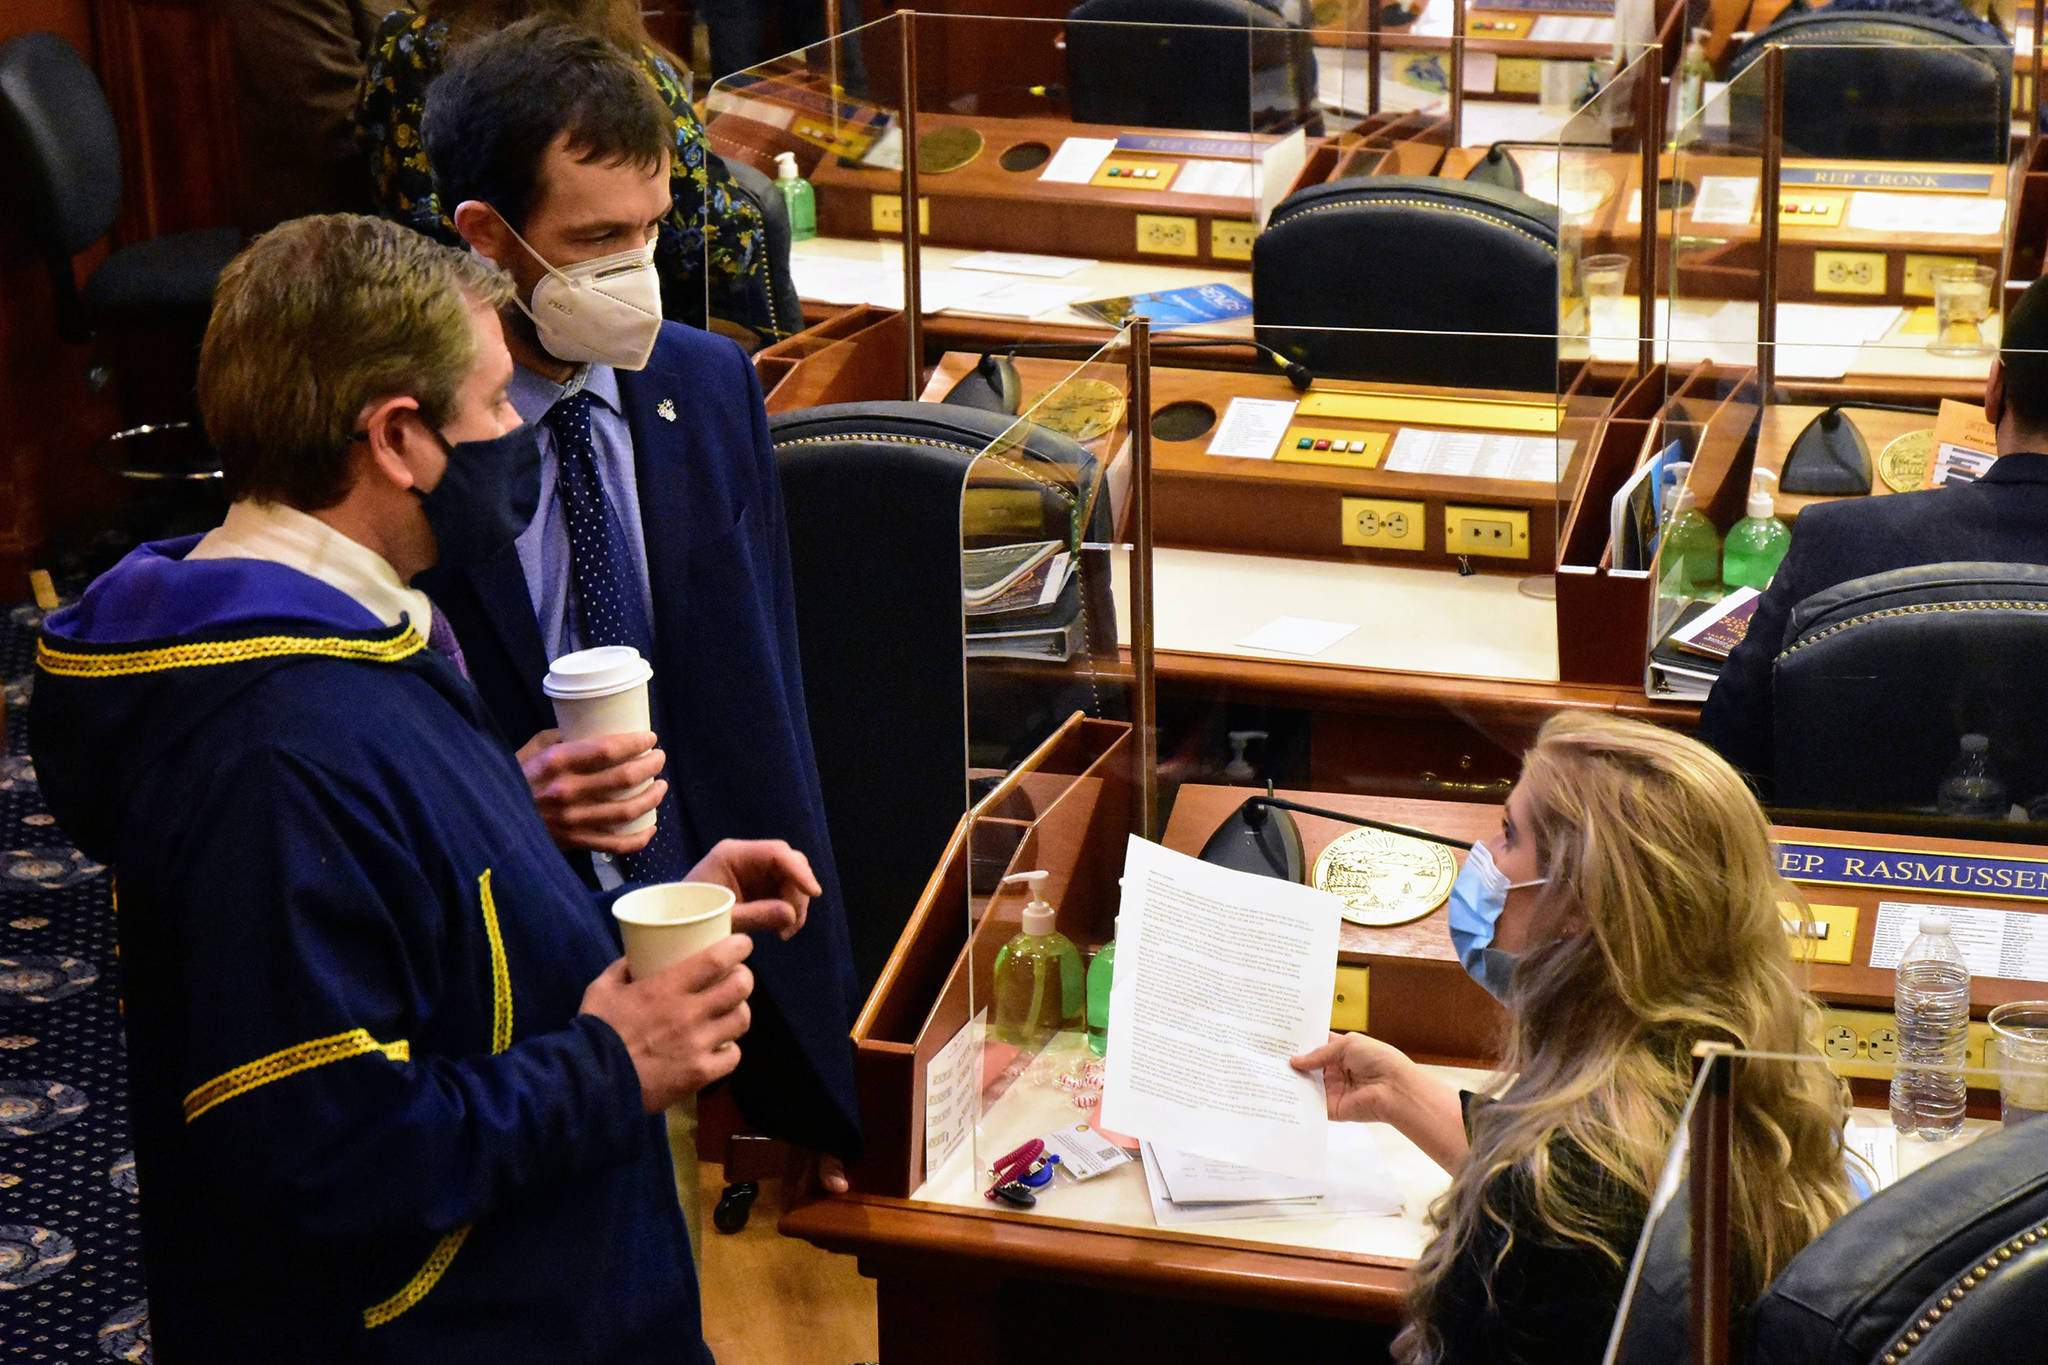 From left to right: Alaska state Reps. Chris Tuck, D-Anchorage, Zack Fields, D-Anchorage, and Sara Rasmussen, R-Anchorage, speak on the Alaska House floor on Friday, March 5, 2021. The House passed a Sense of the House on Friday, condemning as inappropriate and objectifying comments Fields had made toward Rasmussen last month. (Peter Segall / Juneau Empire)